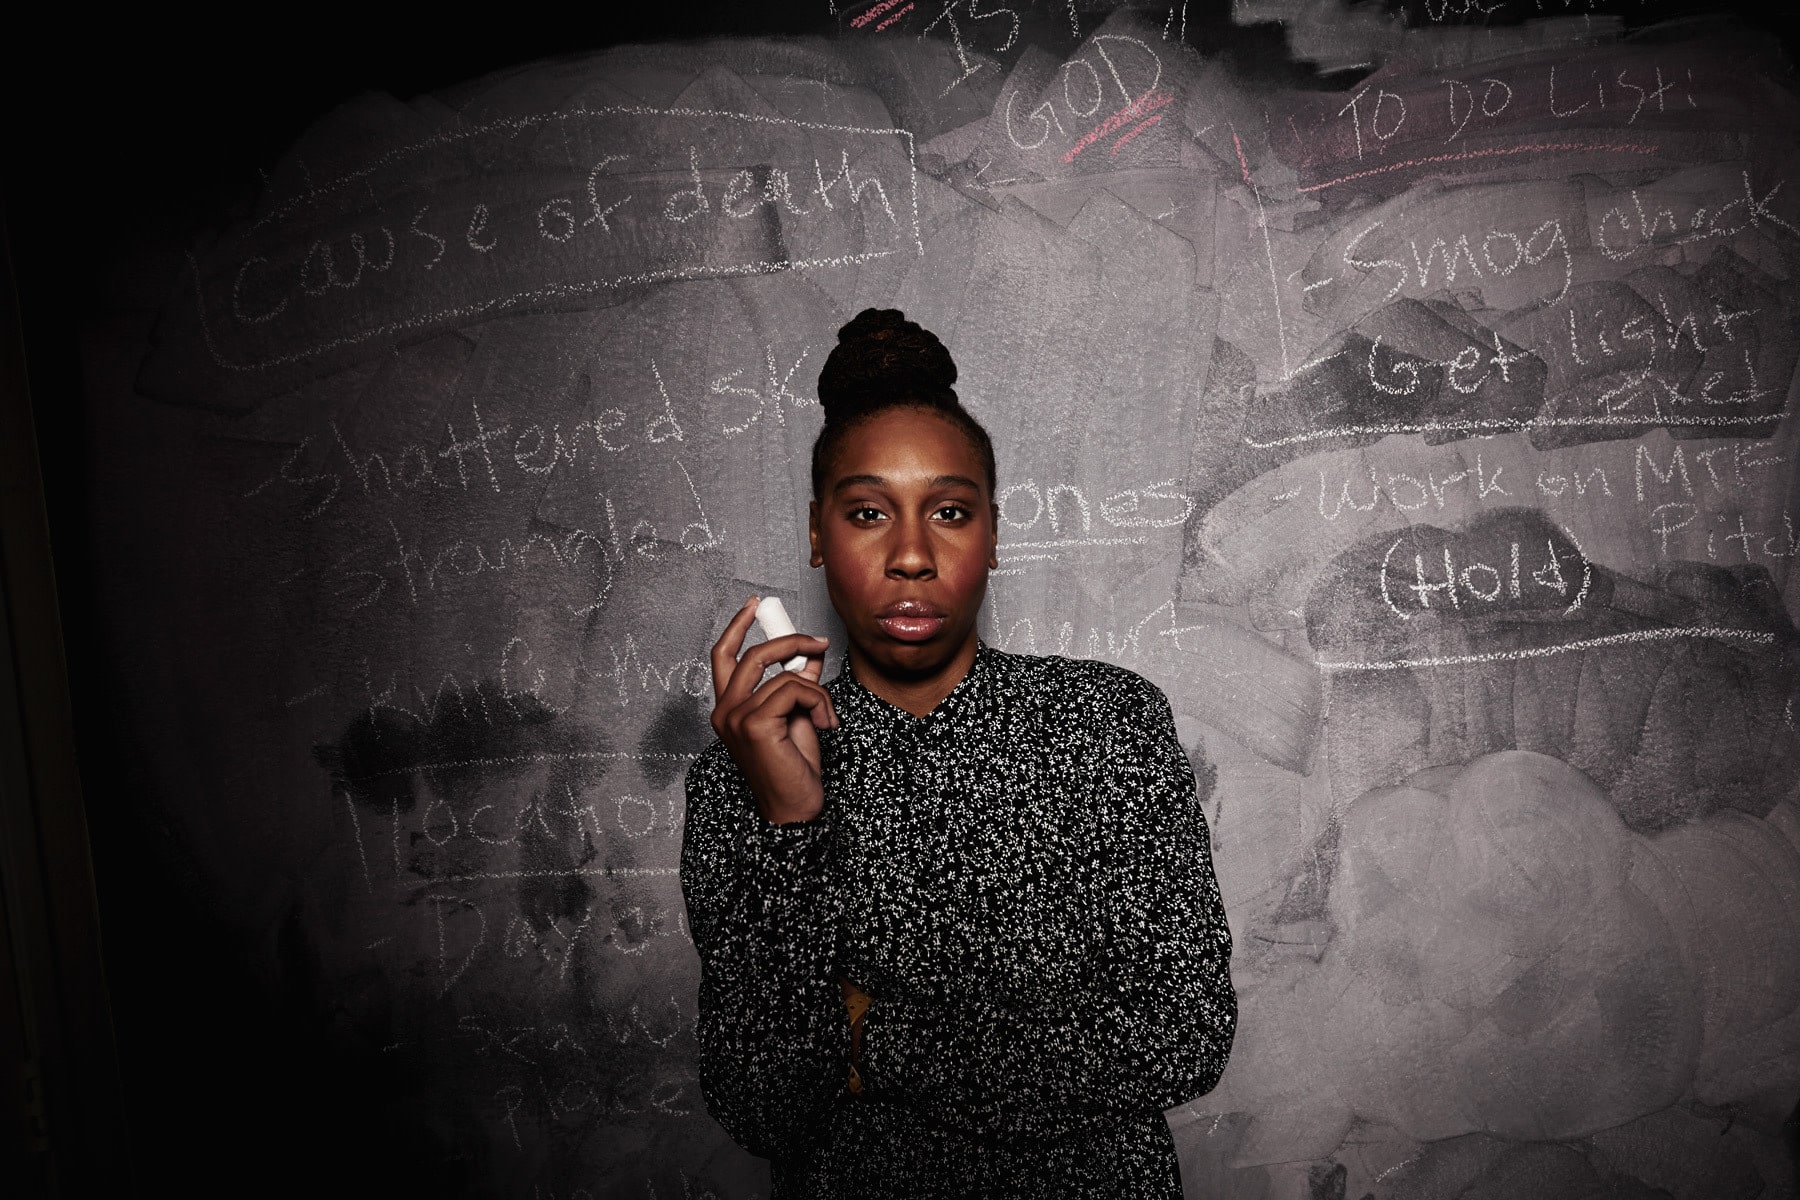 Master of None’s Lena Waithe Curates Creative Voices for Vimeo Channel